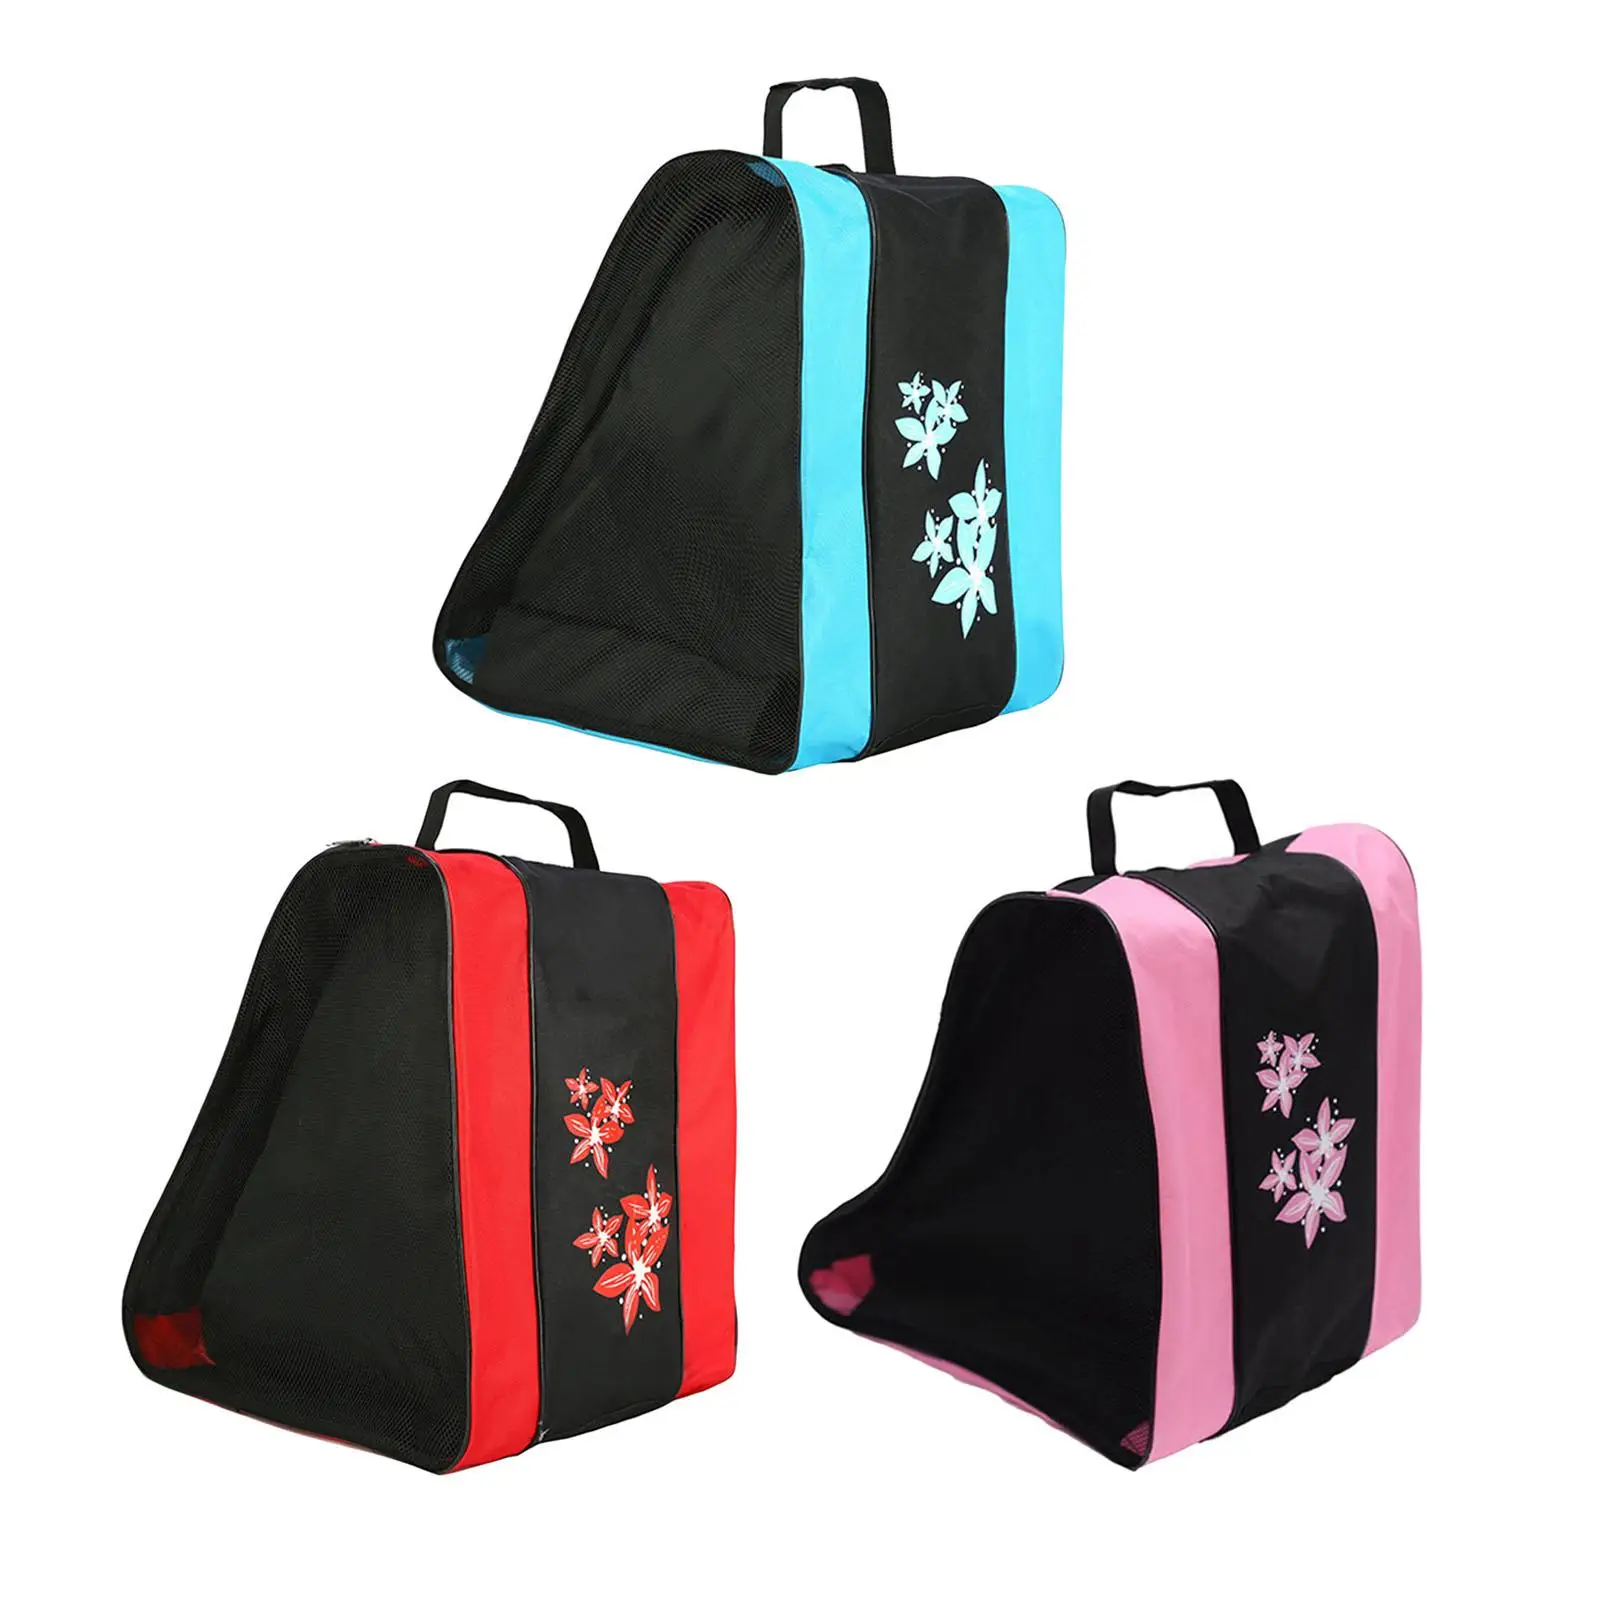  Roller Skating Bag 3Layers Carrying Skate Carry Case Storage Bag Tote for Kids Adults Ice Skates Inline Skates